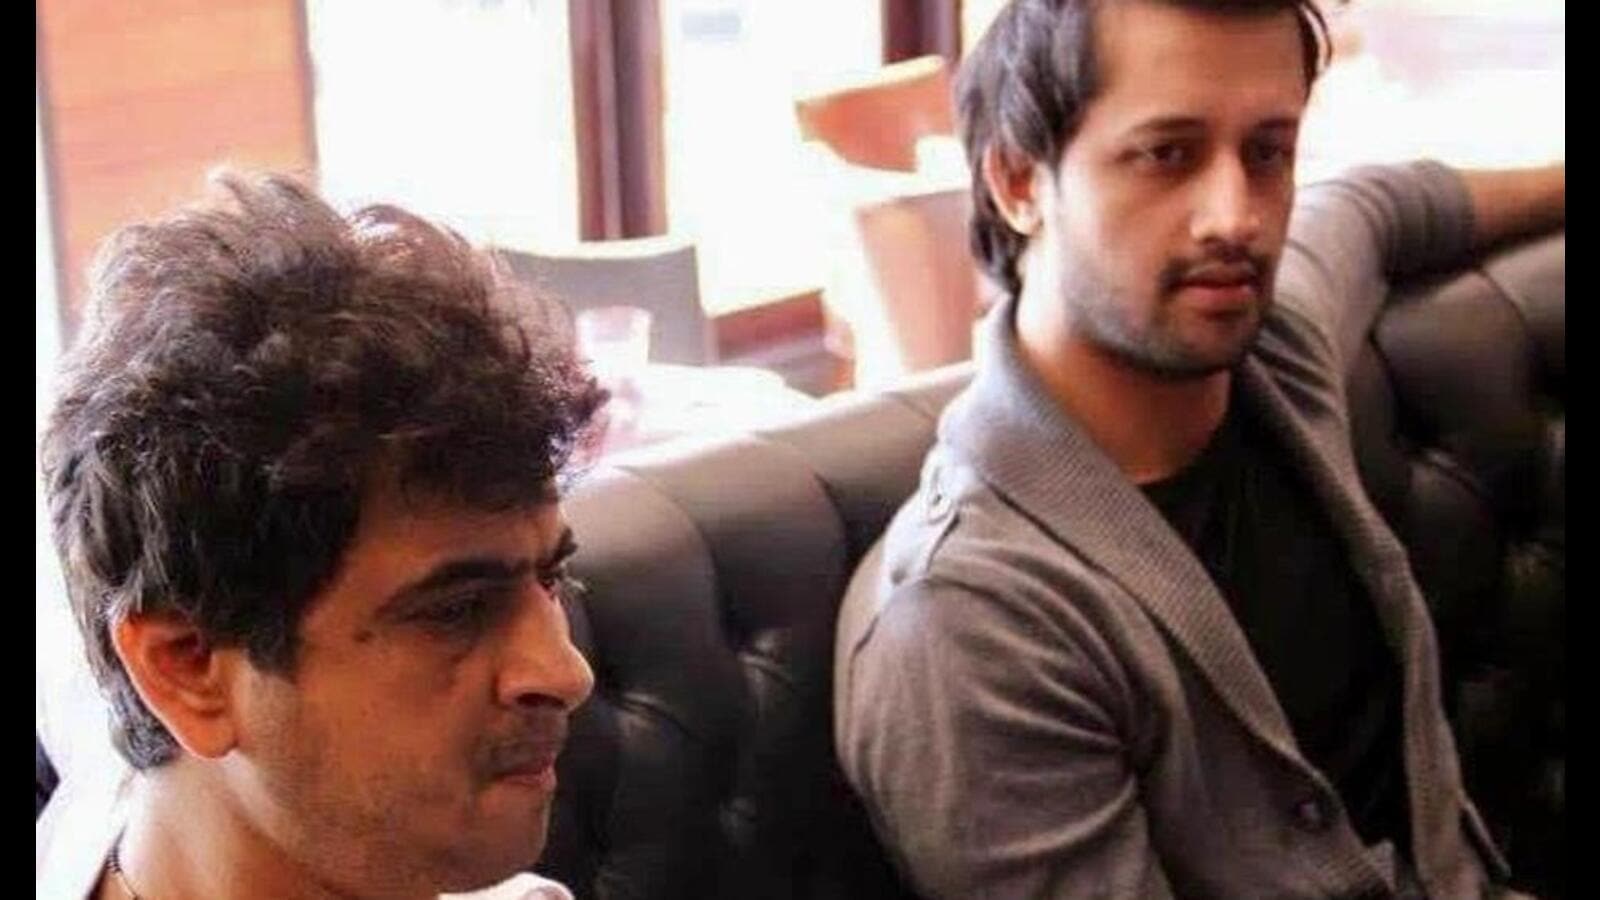 Exclusive: What I meant was not understood: Palash on being trolled over Atif Aslam post